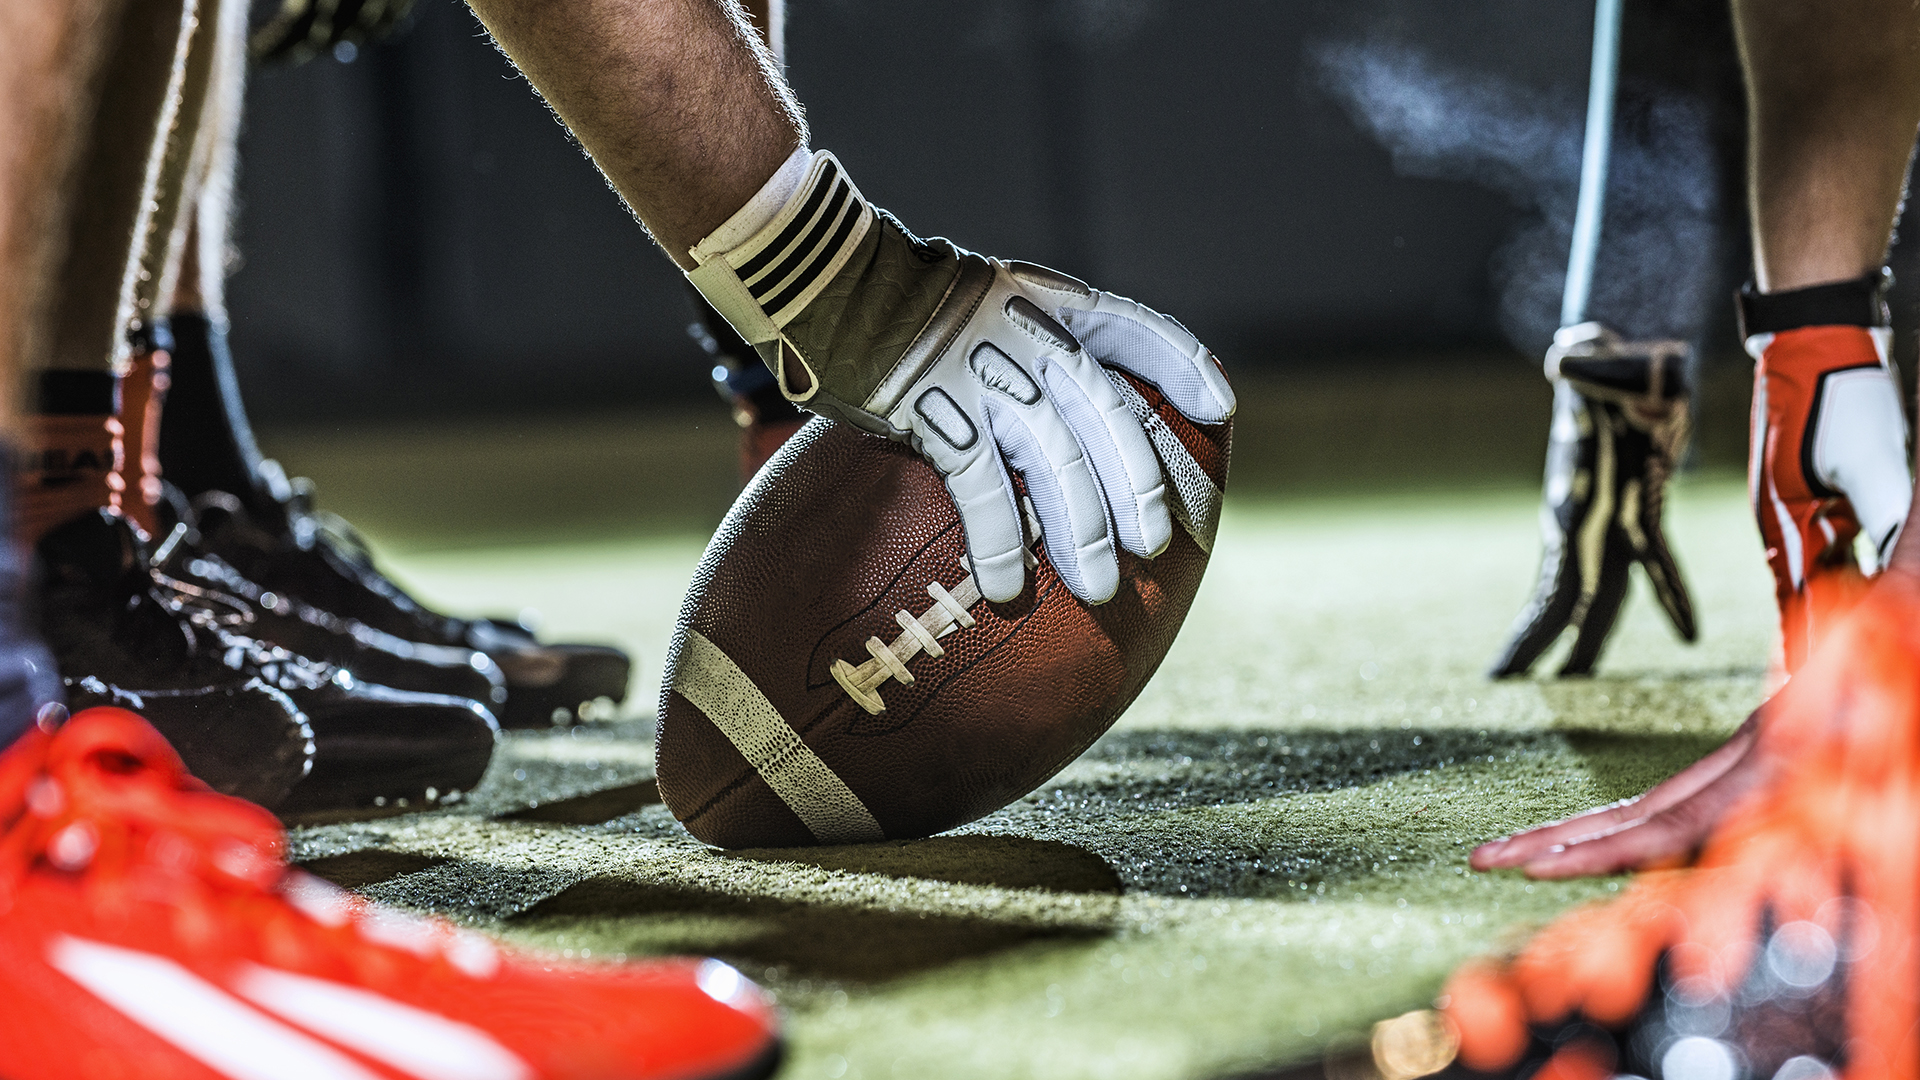 A close up of an American football on the field held in gloved hands